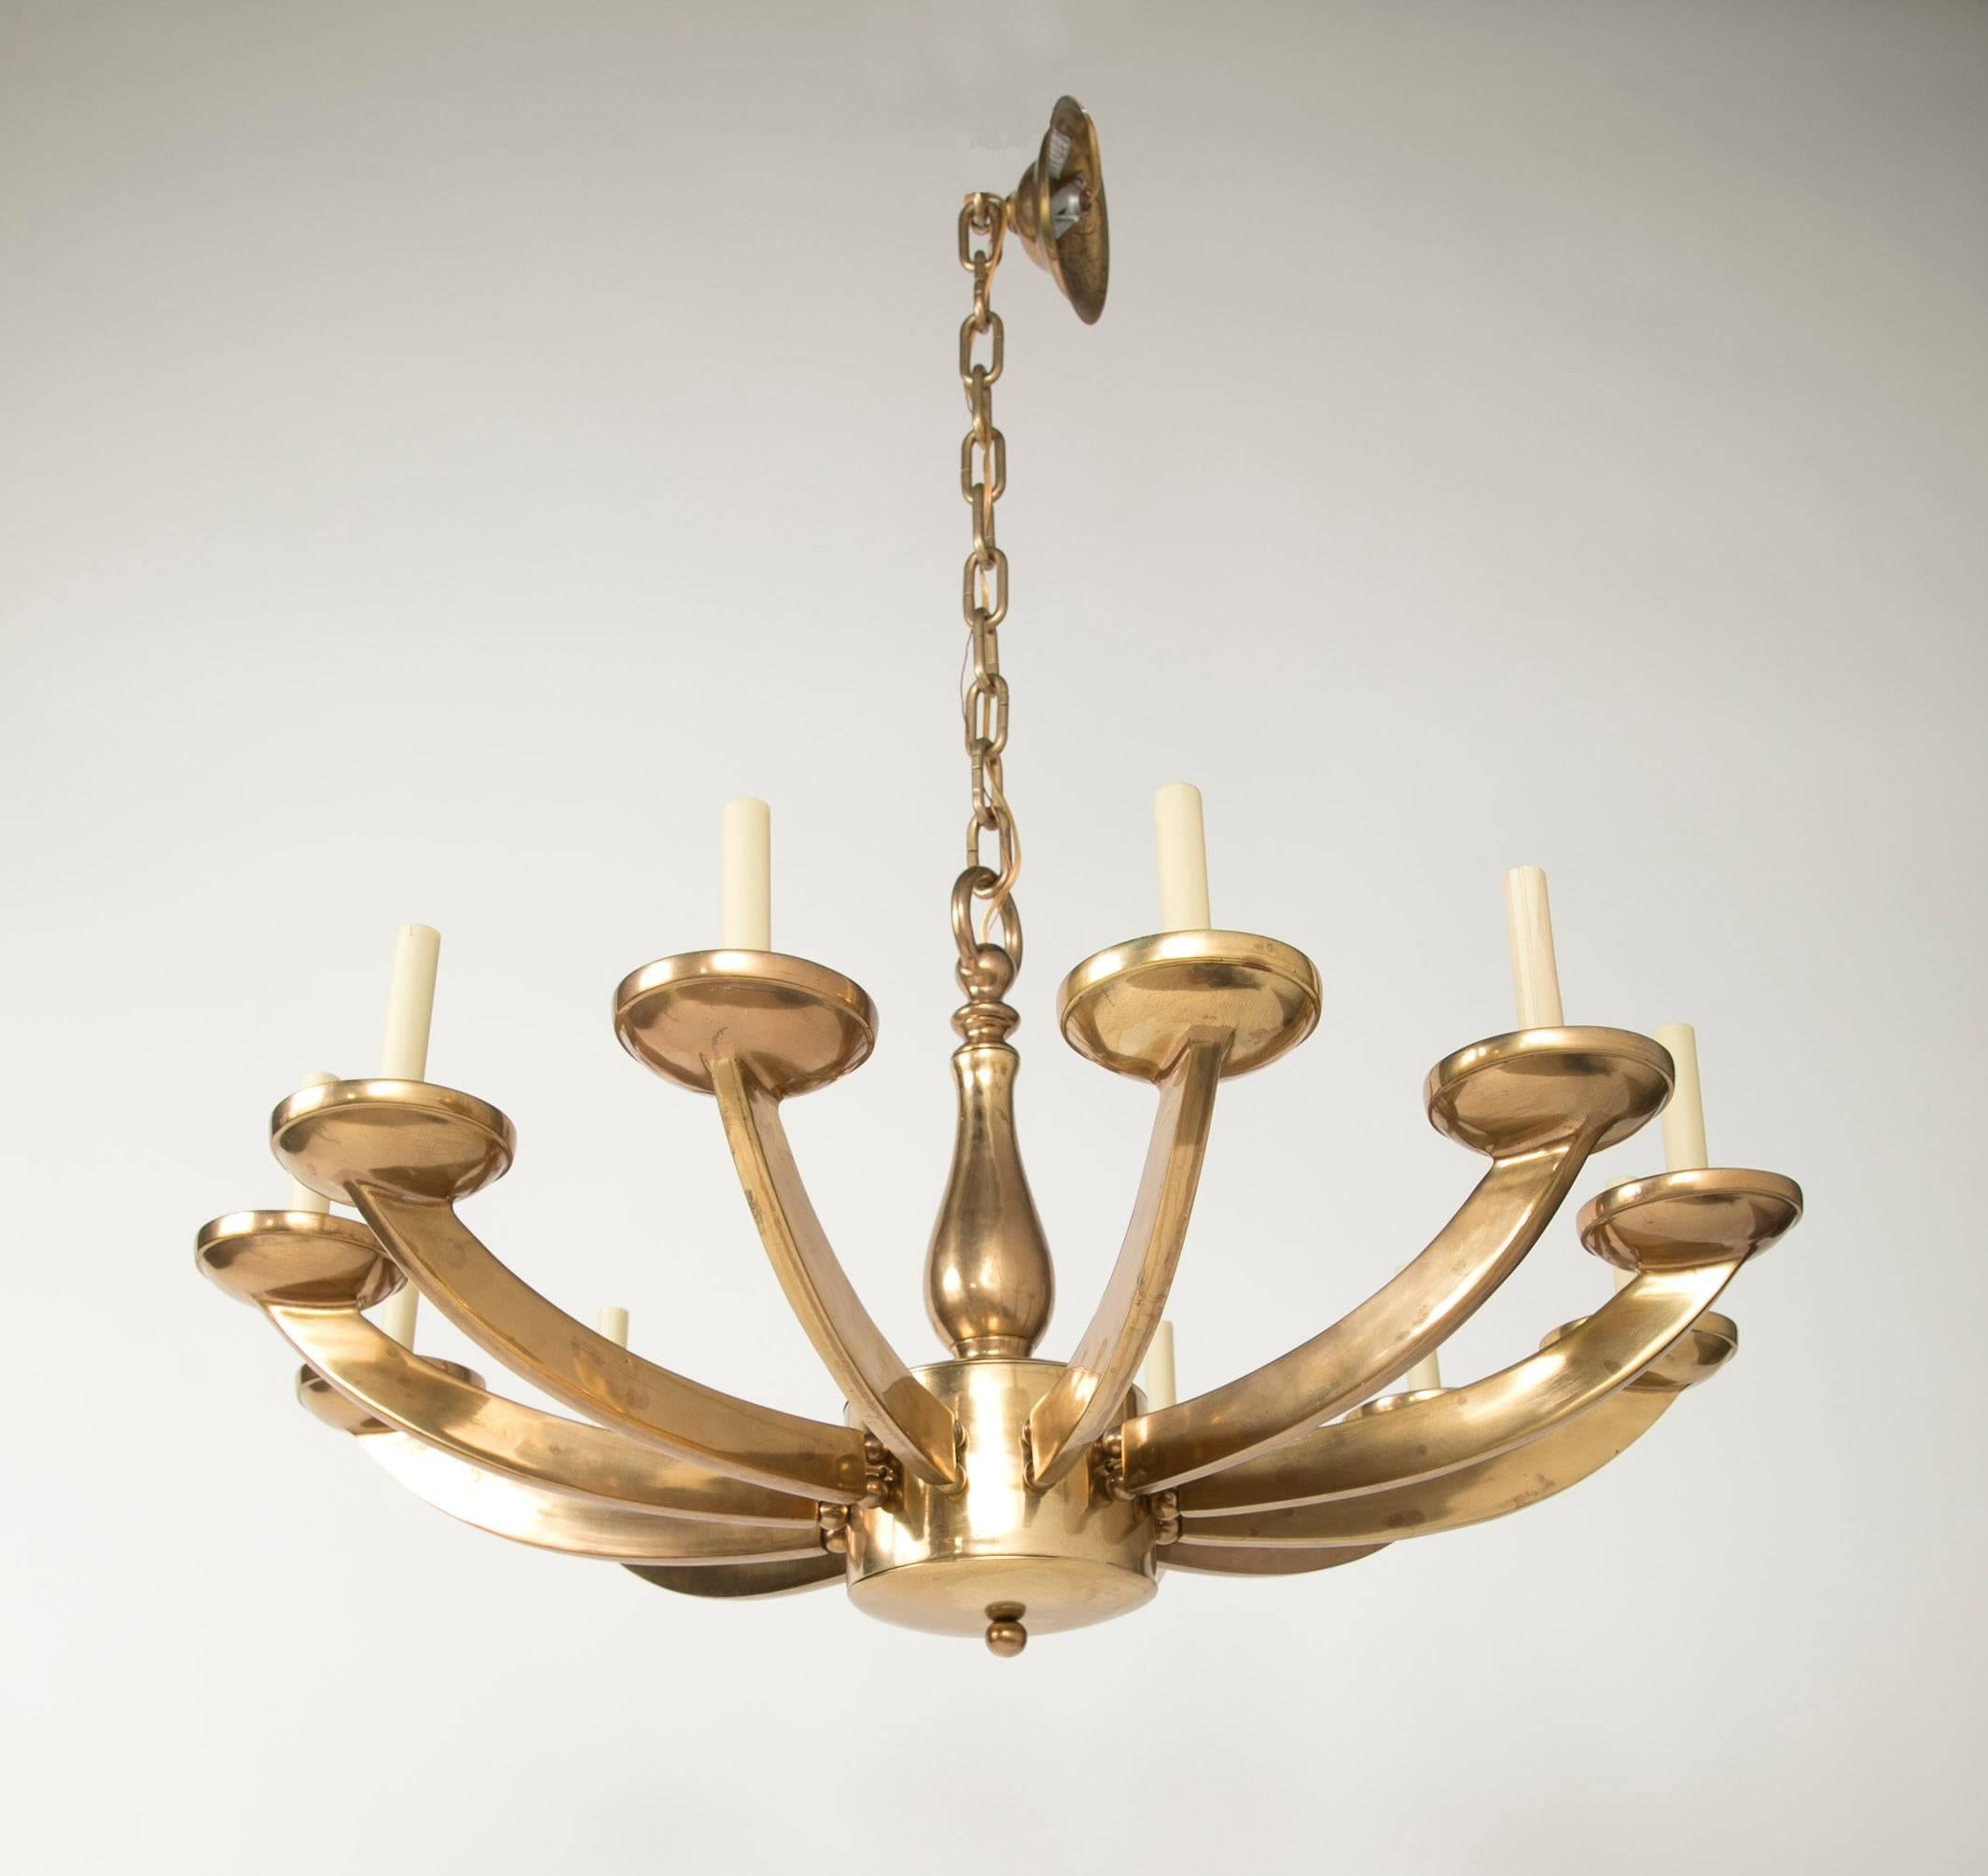 Mid-20th century Italian brass chandelier with twelve arms. 36 inches diameter.